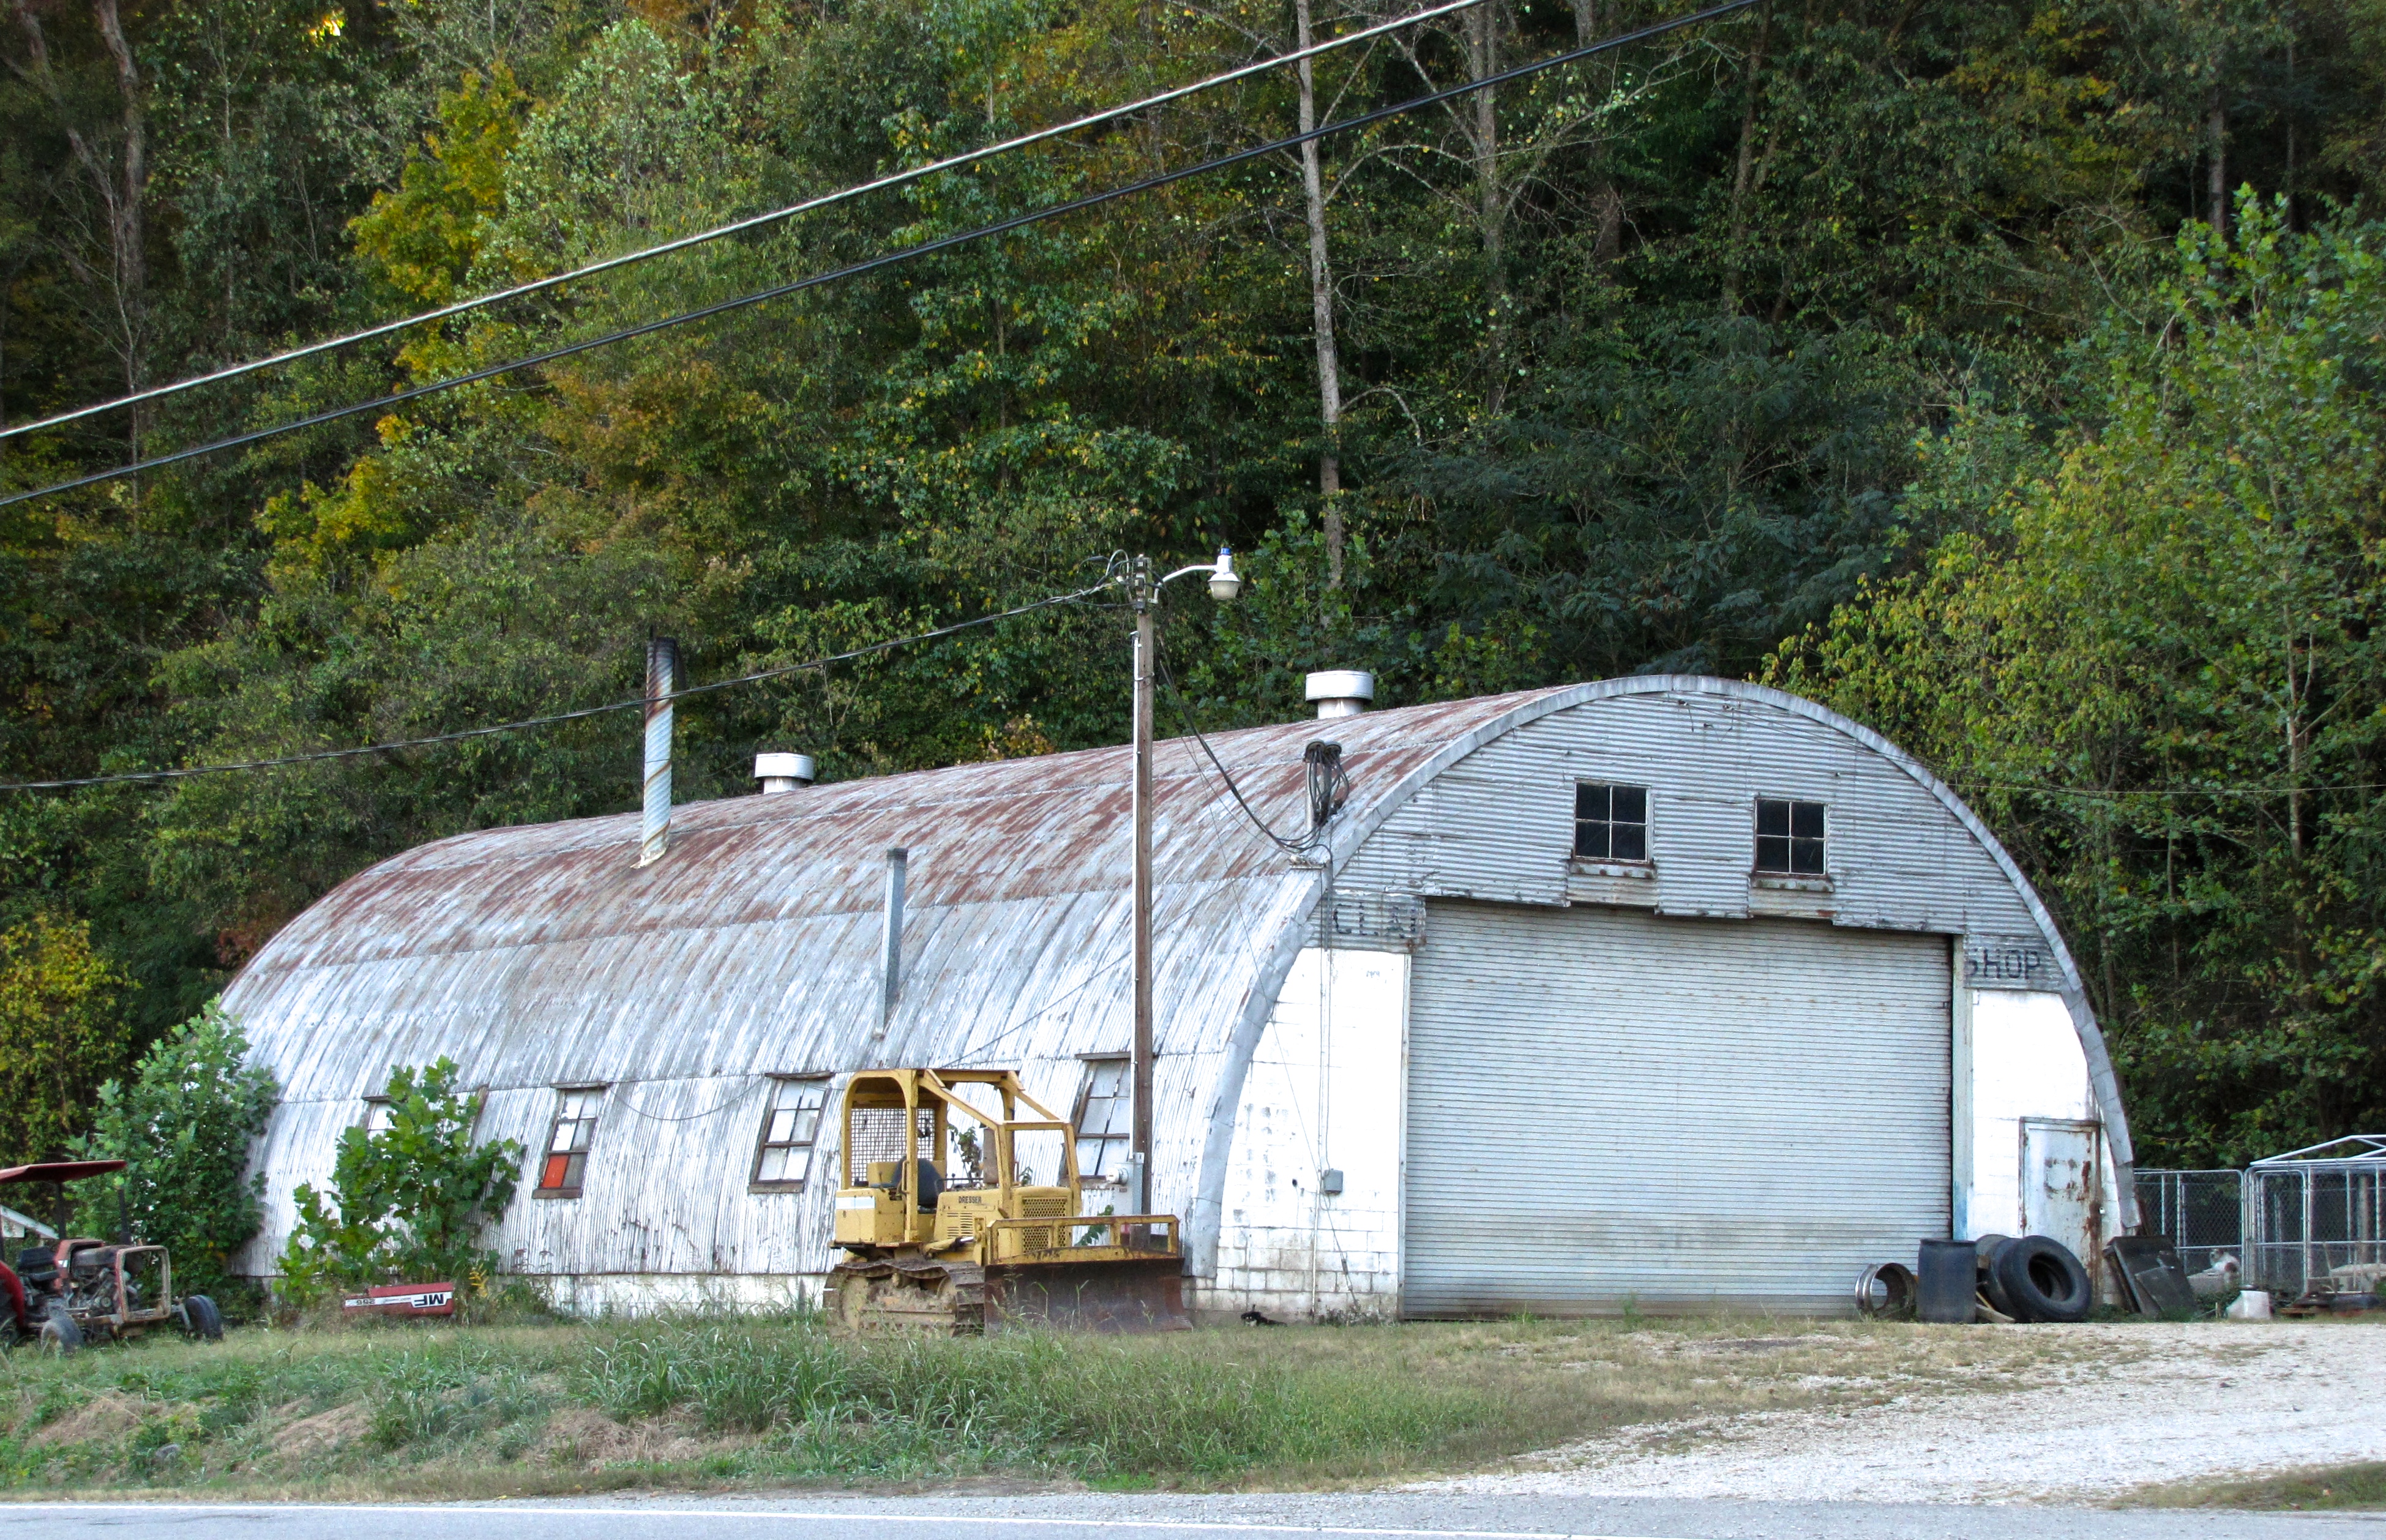 quonset hut in Privacy Policy, ID